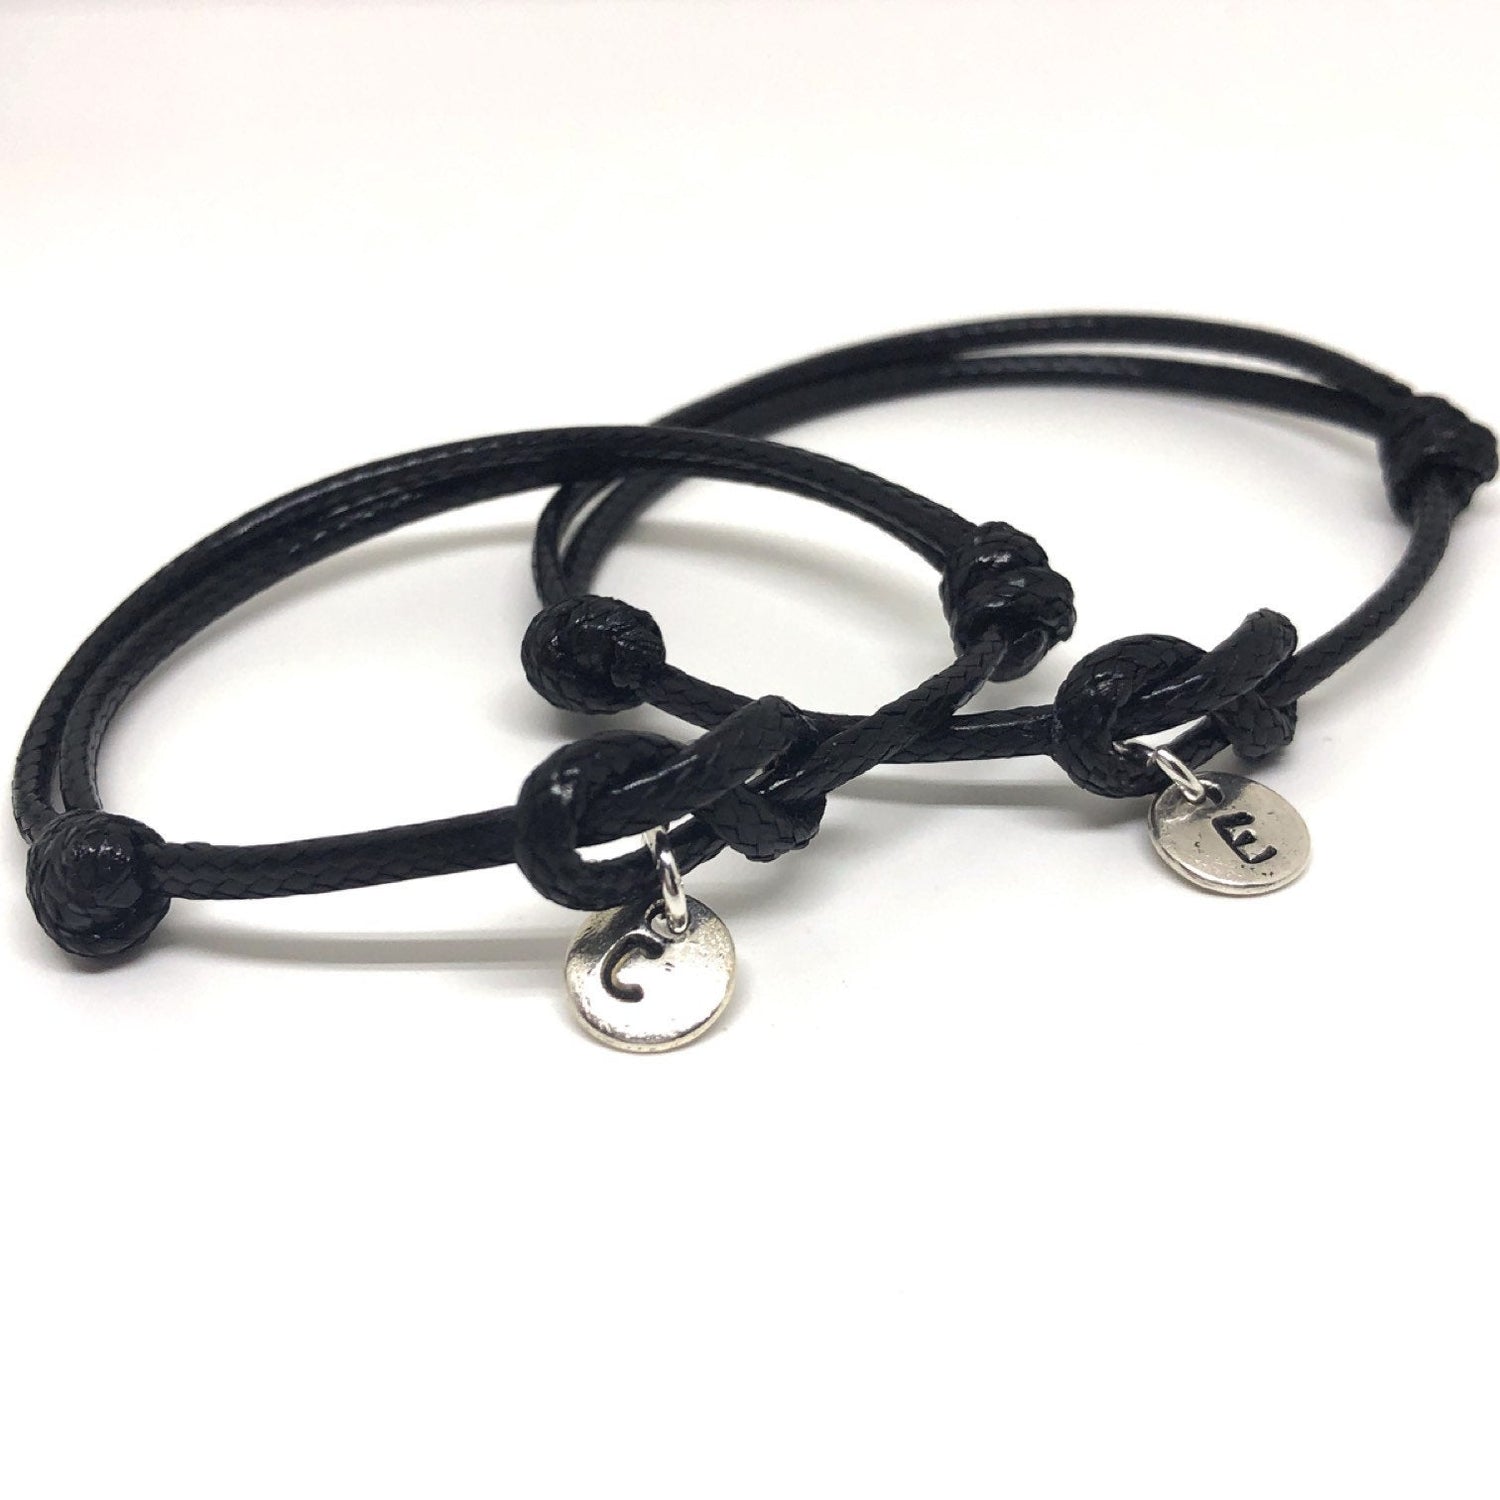 Infinity Knot Couple Bracelets with Initials - Gifts&Knots